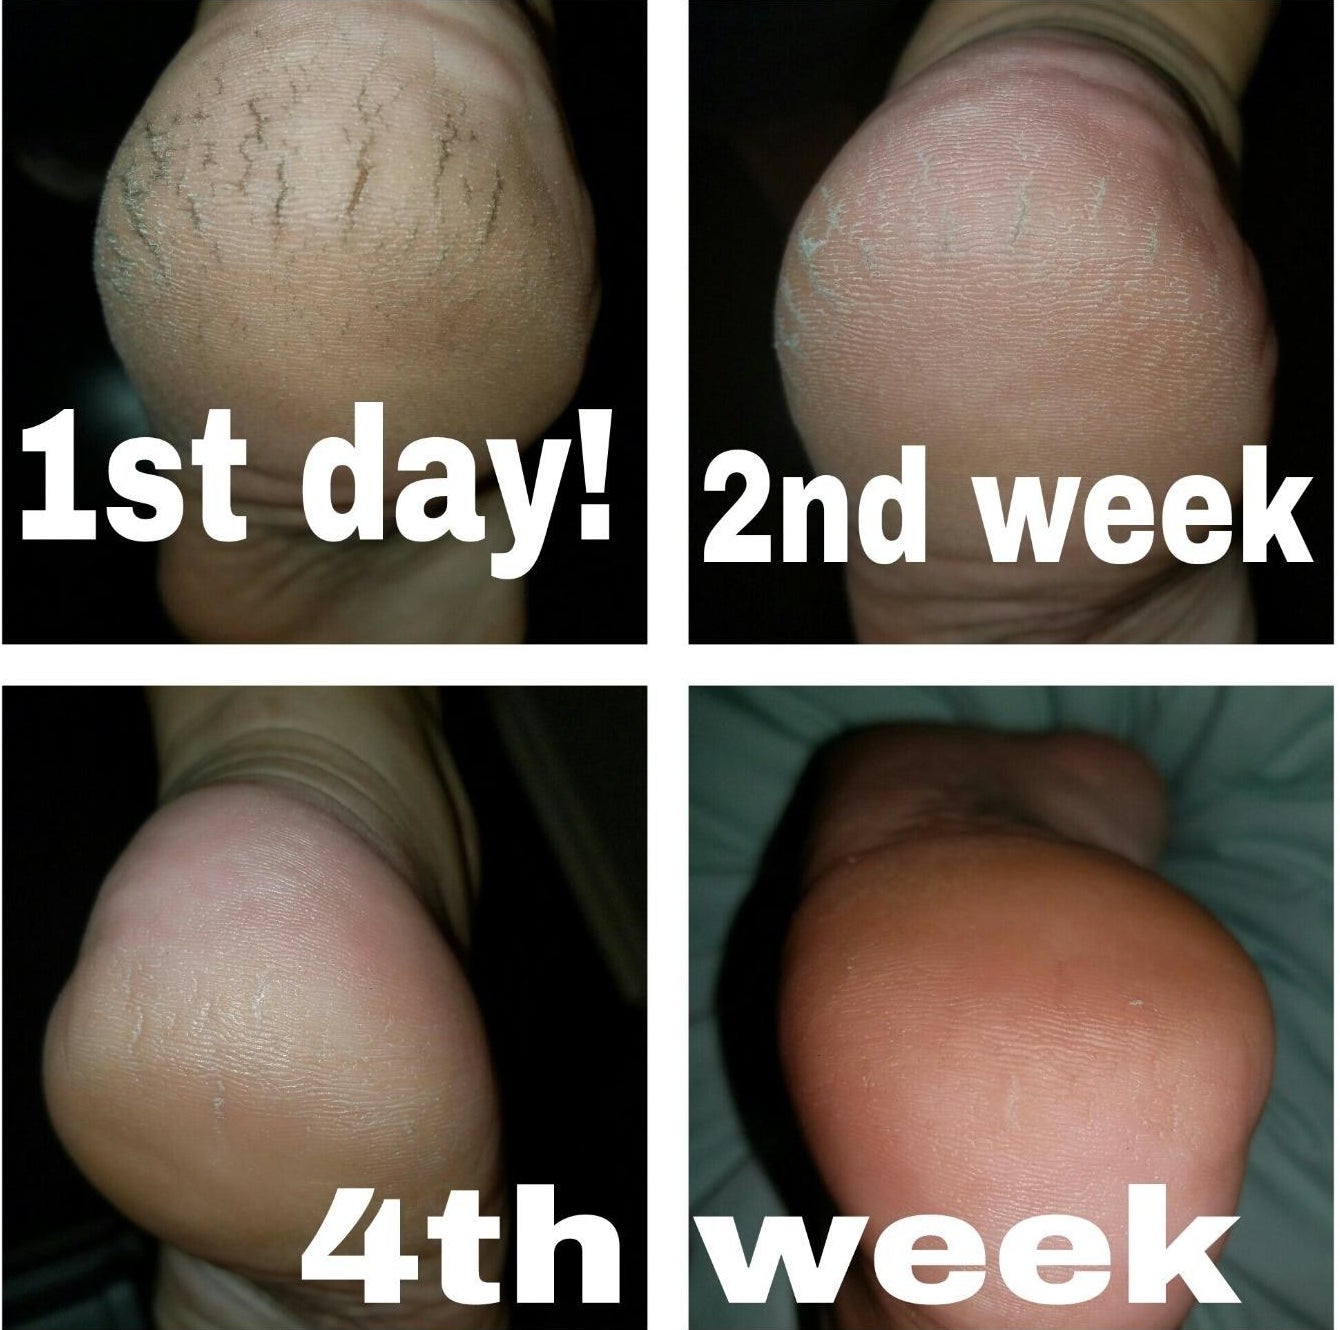 Four photos showing dry, discolored heels on the first day of use versus smoother looking heels with no visible cracks by the fourth week of use